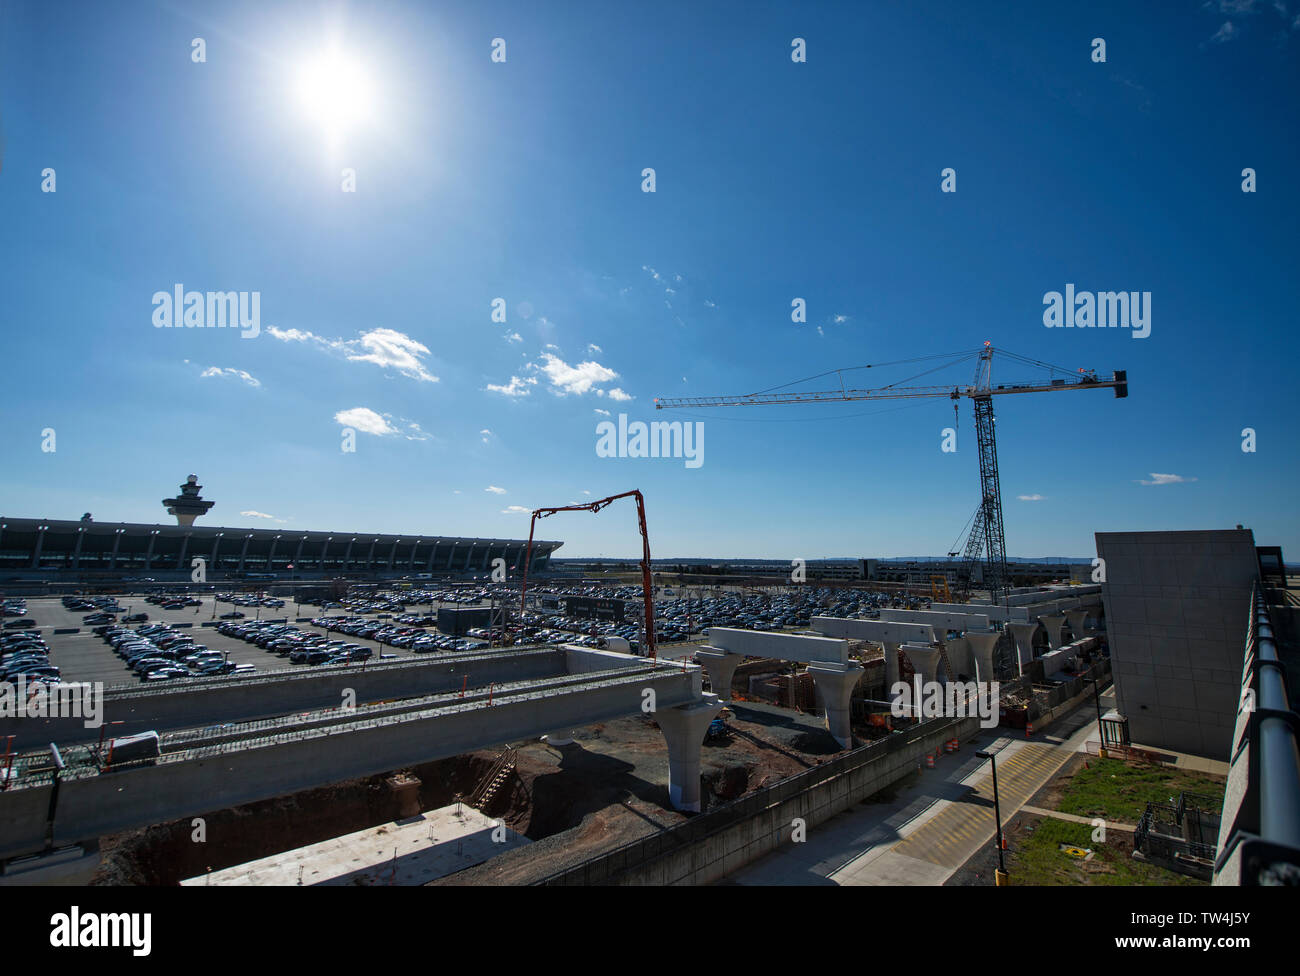 UNITED STATES - 02-13-2017: Future Metro Dulles Station at  Dulles International Airport. The Metro Silver Line’s capital costs are almost double what Stock Photo